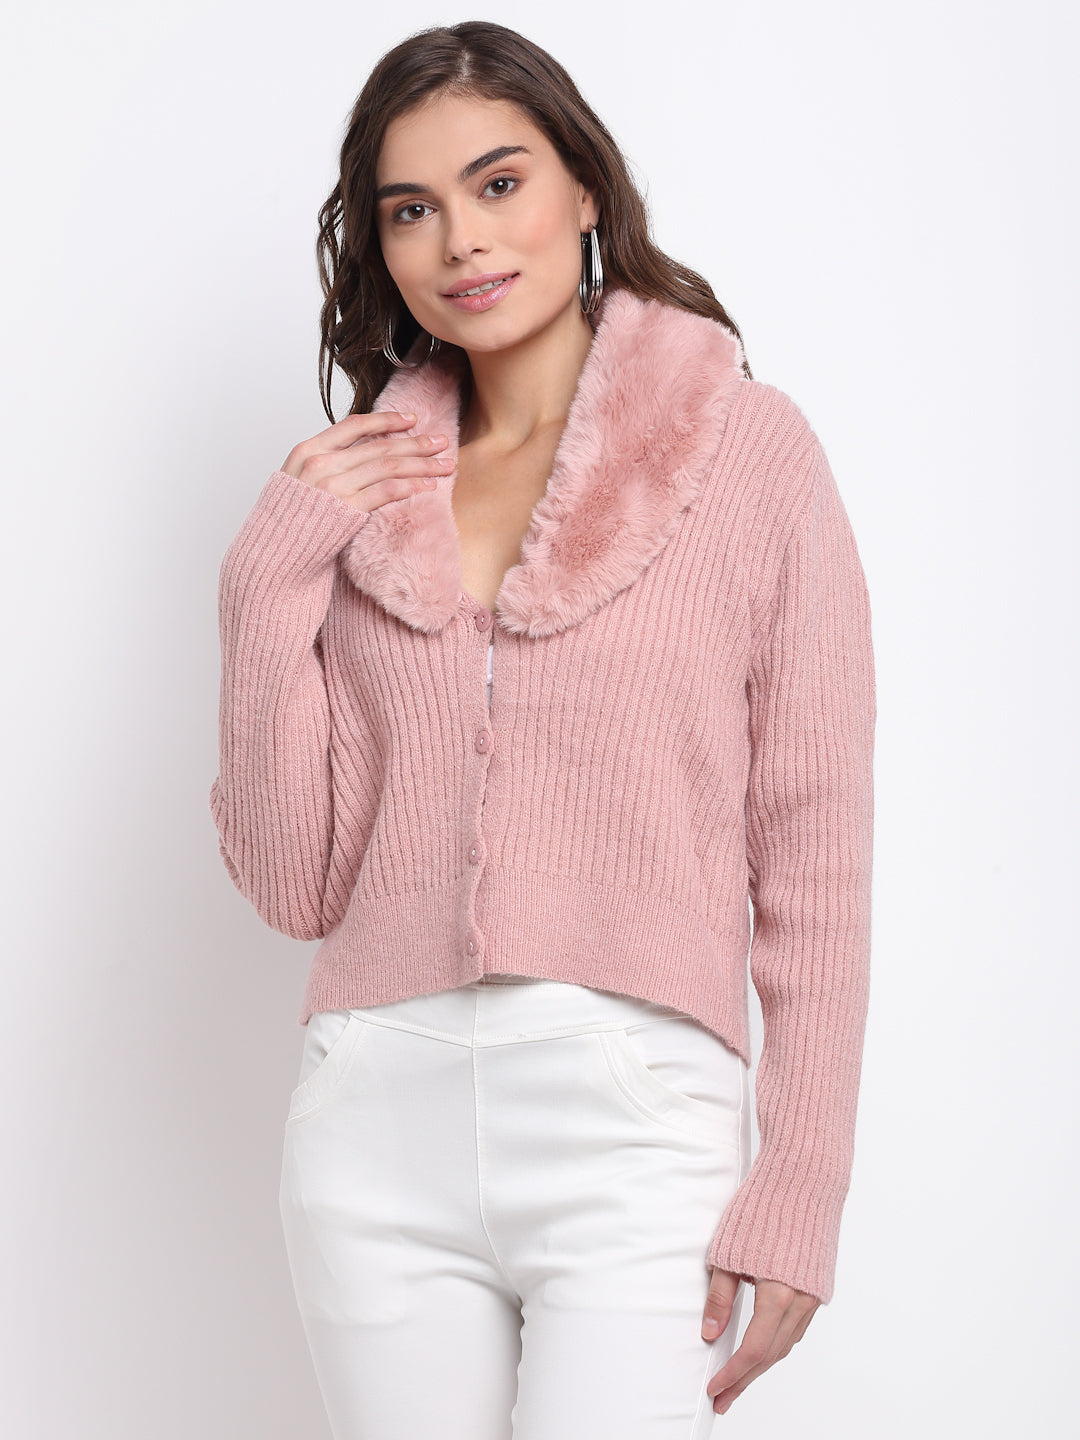 Best Pink Collared Solid KNIT Cardigan